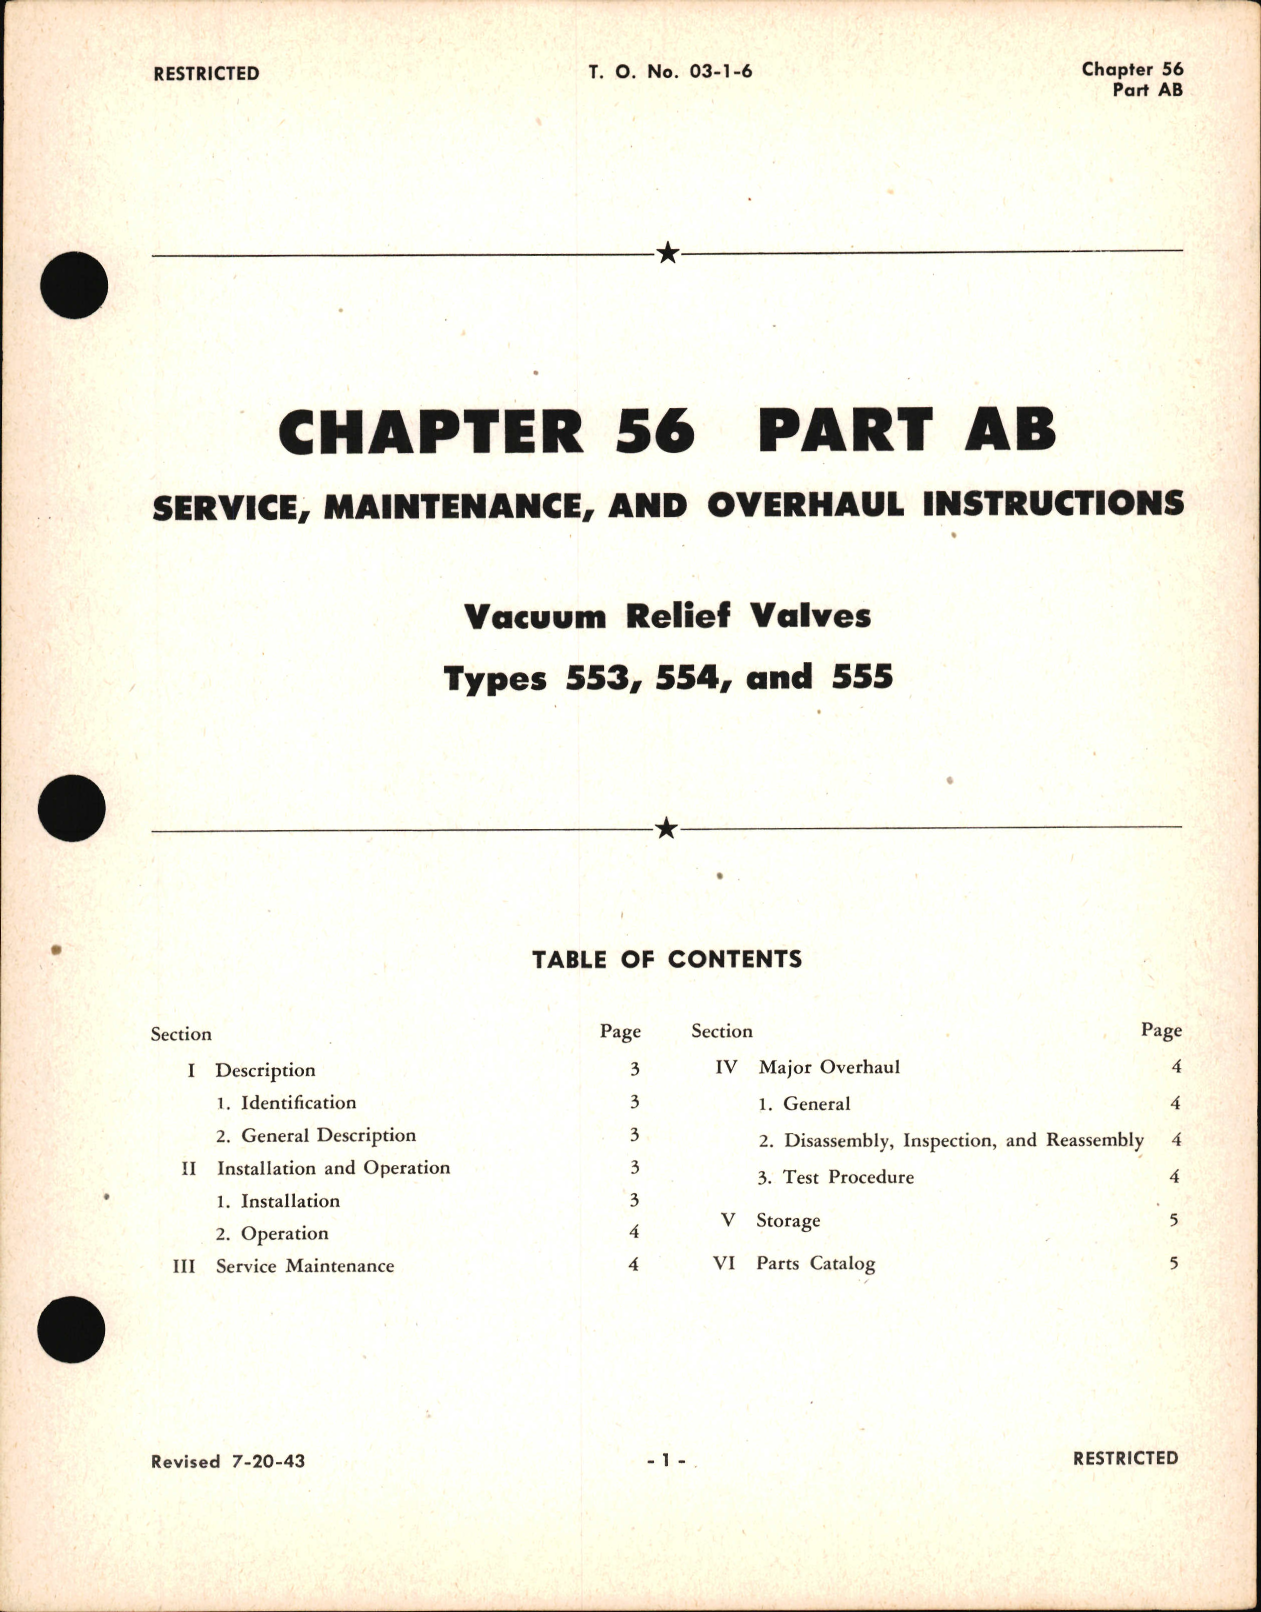 Sample page 1 from AirCorps Library document: Service, Maintenance and Overhaul Instructions for Vacuum Relief Valves, Ch 56 Part AB